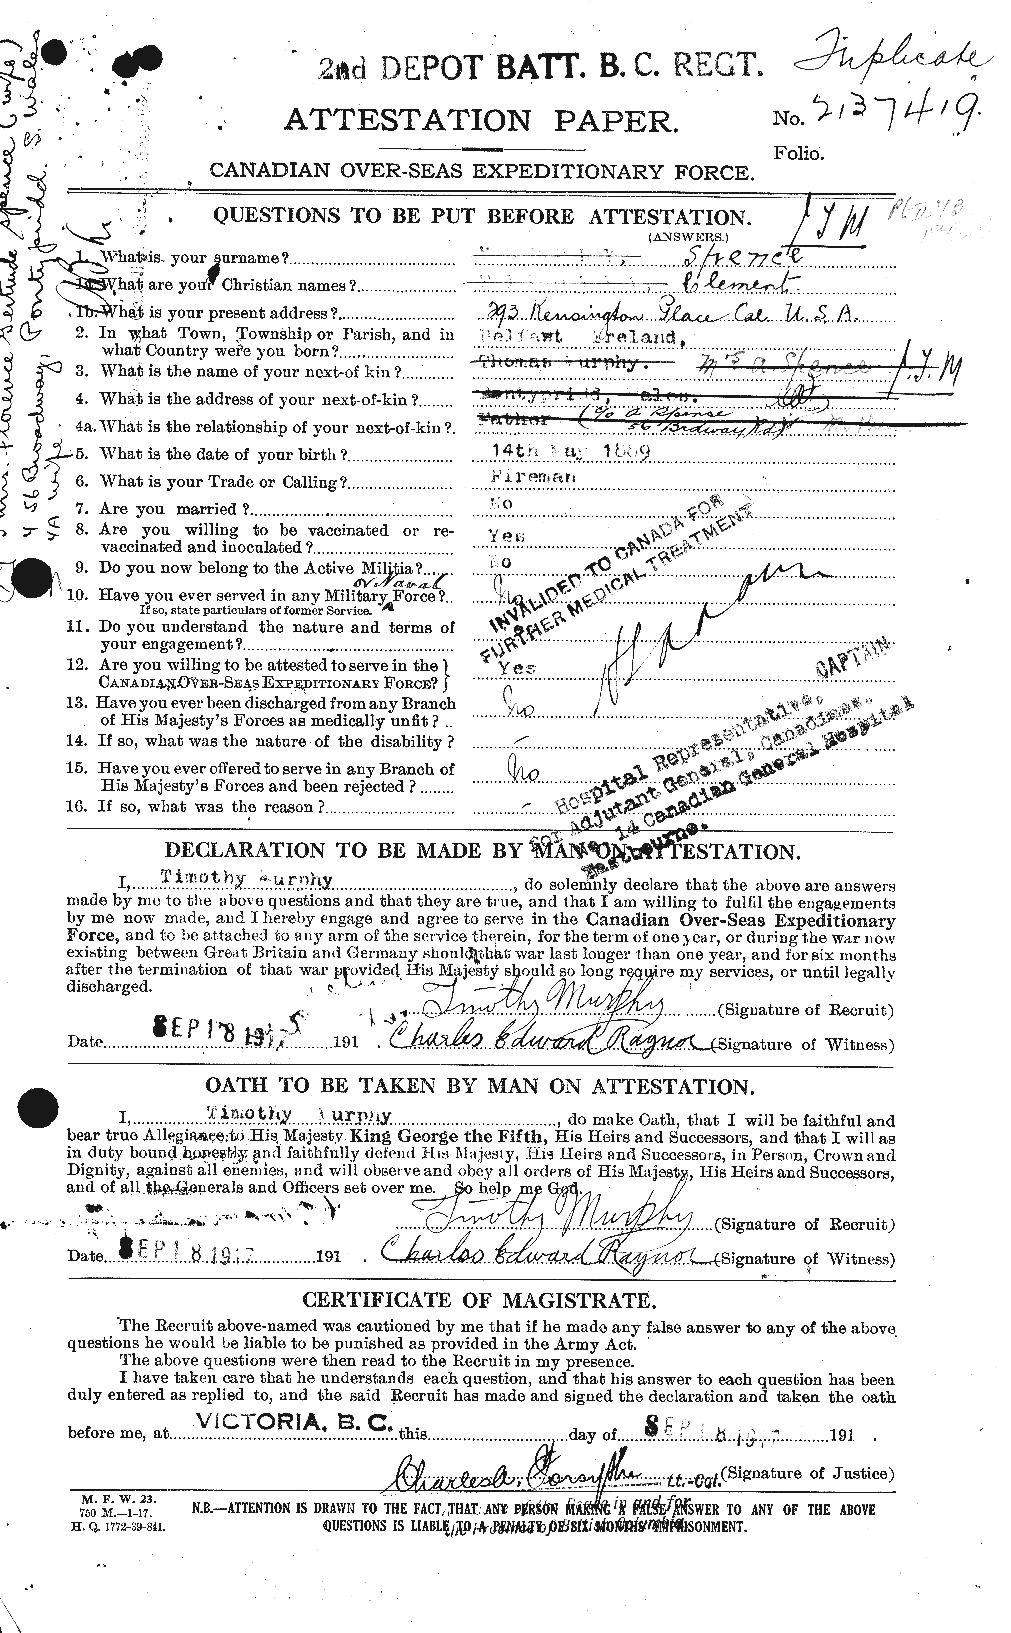 Personnel Records of the First World War - CEF 109559a